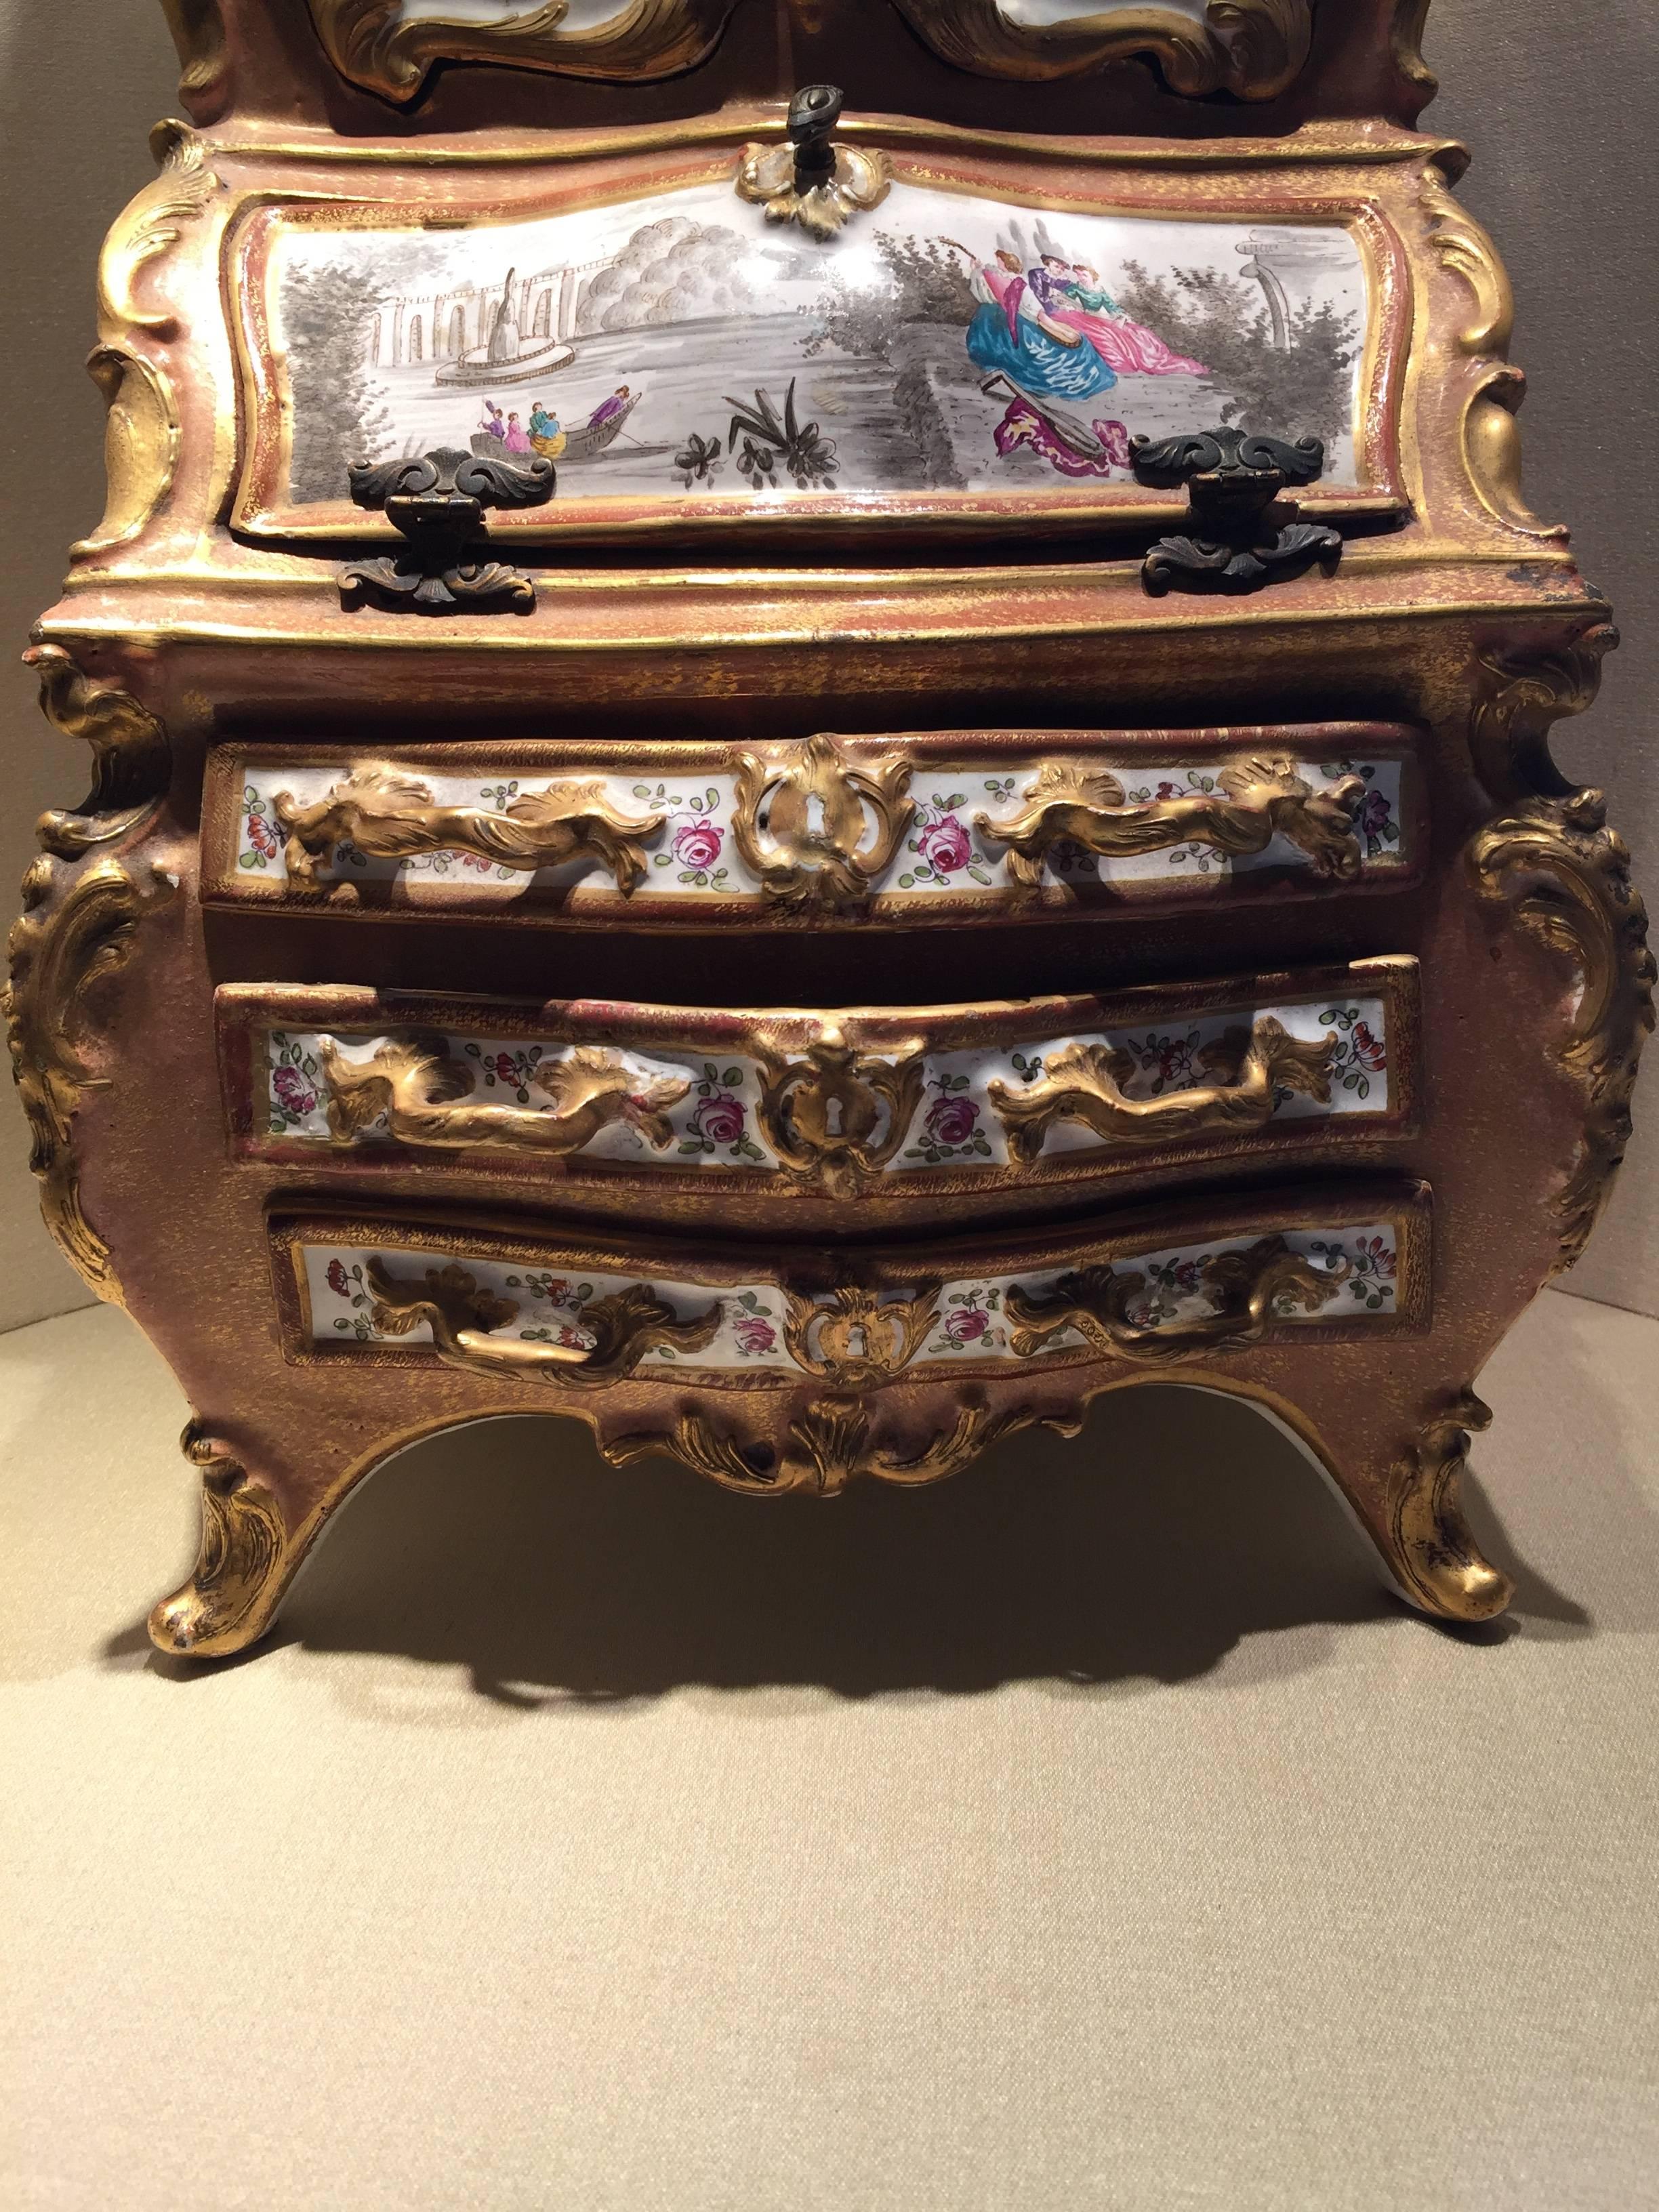 An amazing porcelain cabinet with landscapes and Classic figures hand-painted, floral decorations on white background inside made by Sèvres manufacturing in 1870. Hallmark on the back.